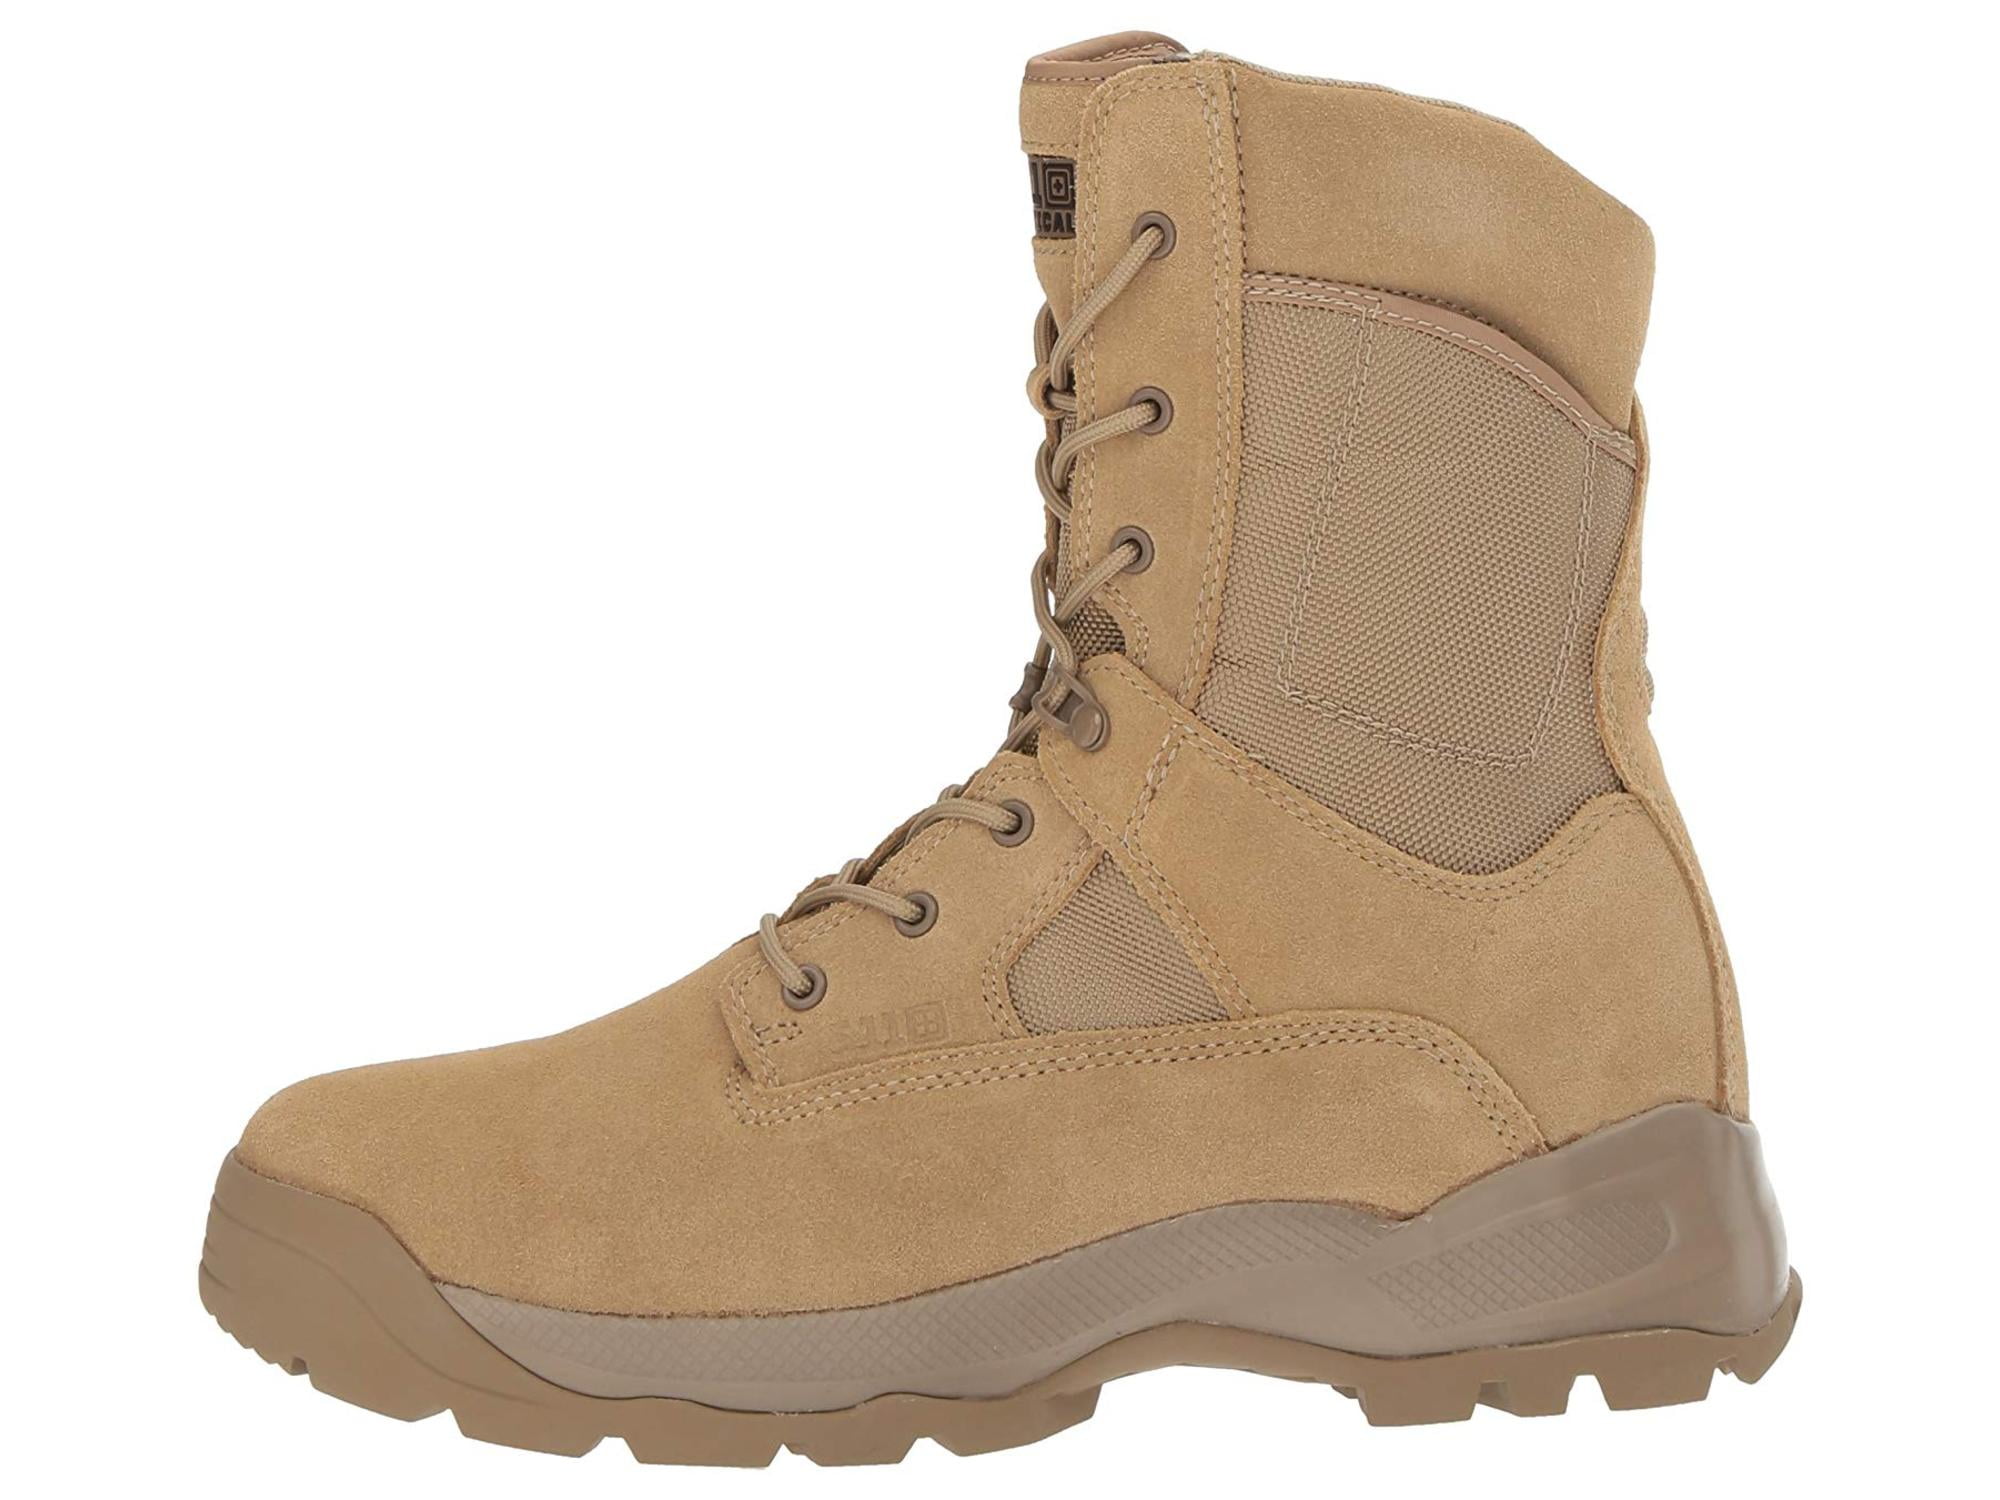 5.11 Tactical - 5.11 ATAC Coyote 8 in. Side Zip Boot, Coyote, 11 R ...